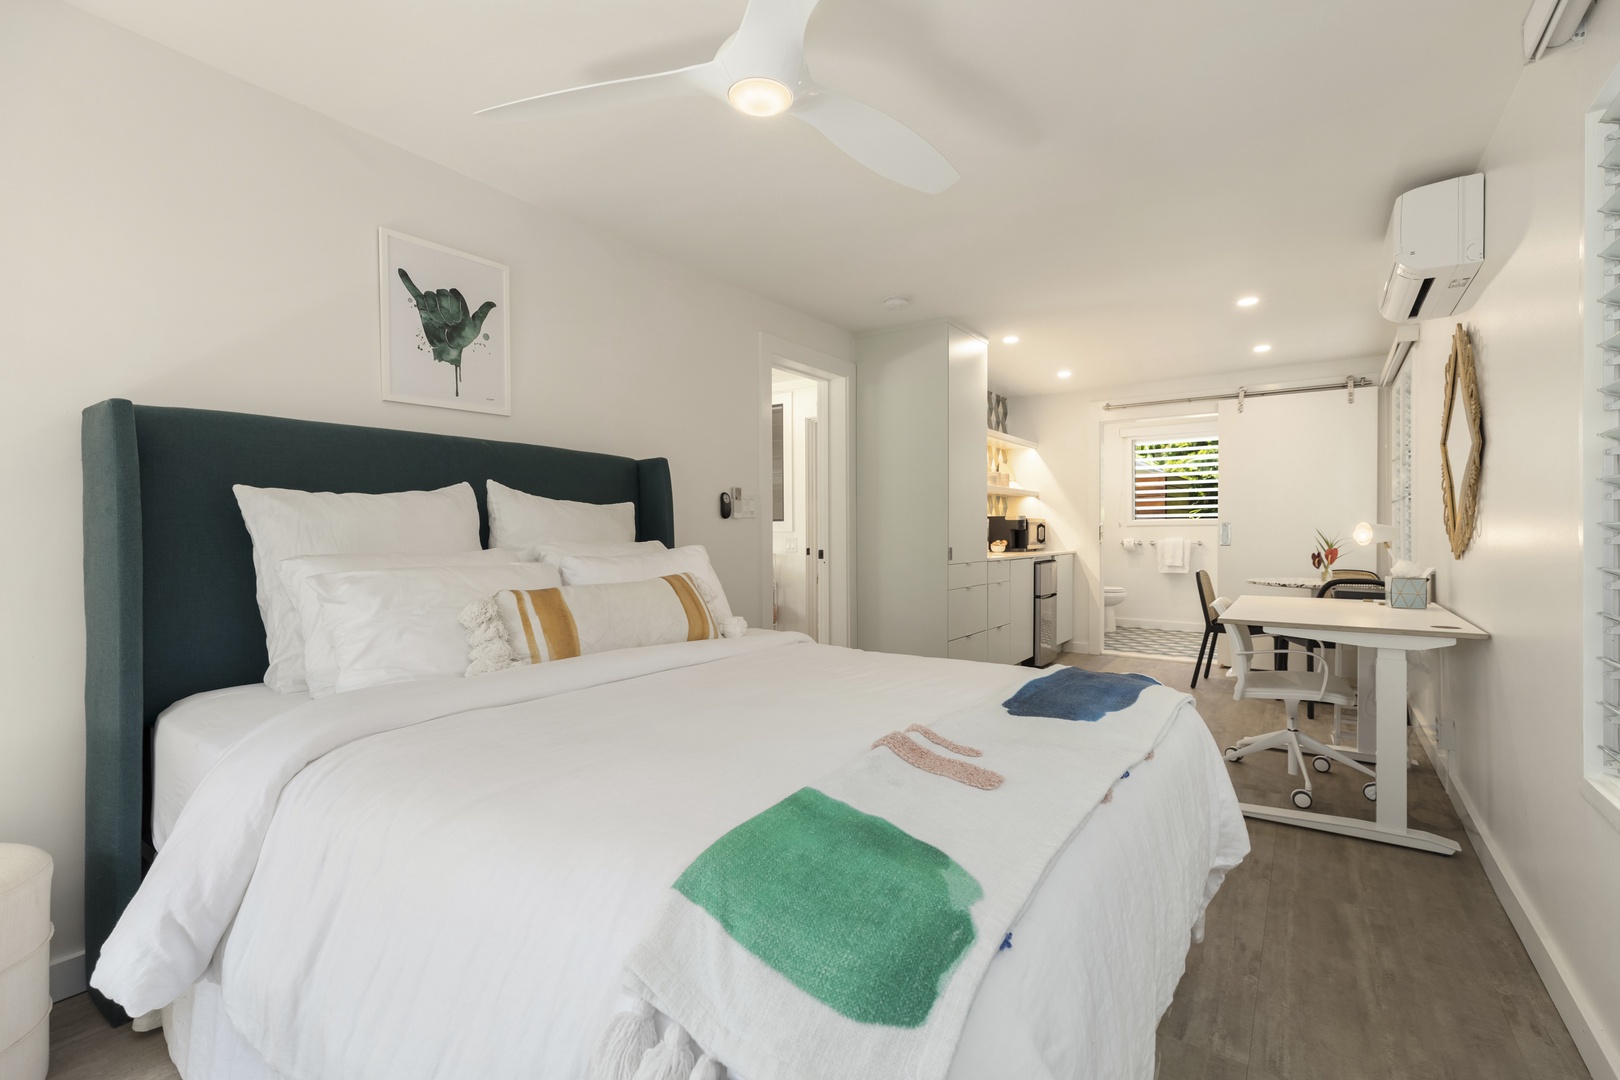 Kailua Vacation Rentals, Lanikai Hideaway - Second guest bedroom with luxury appointments